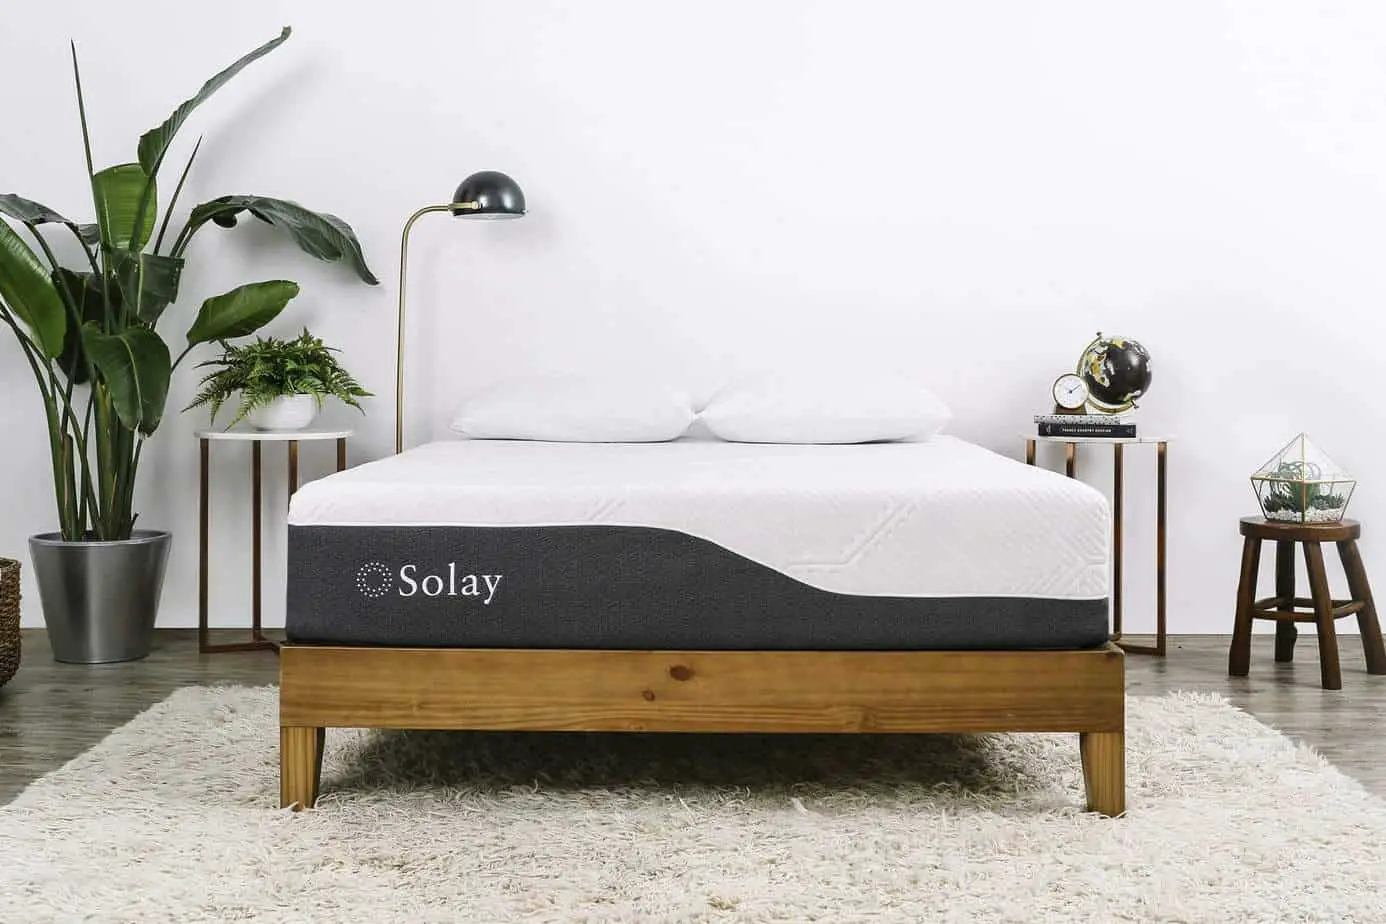 Solay Hybrid Mattress Review